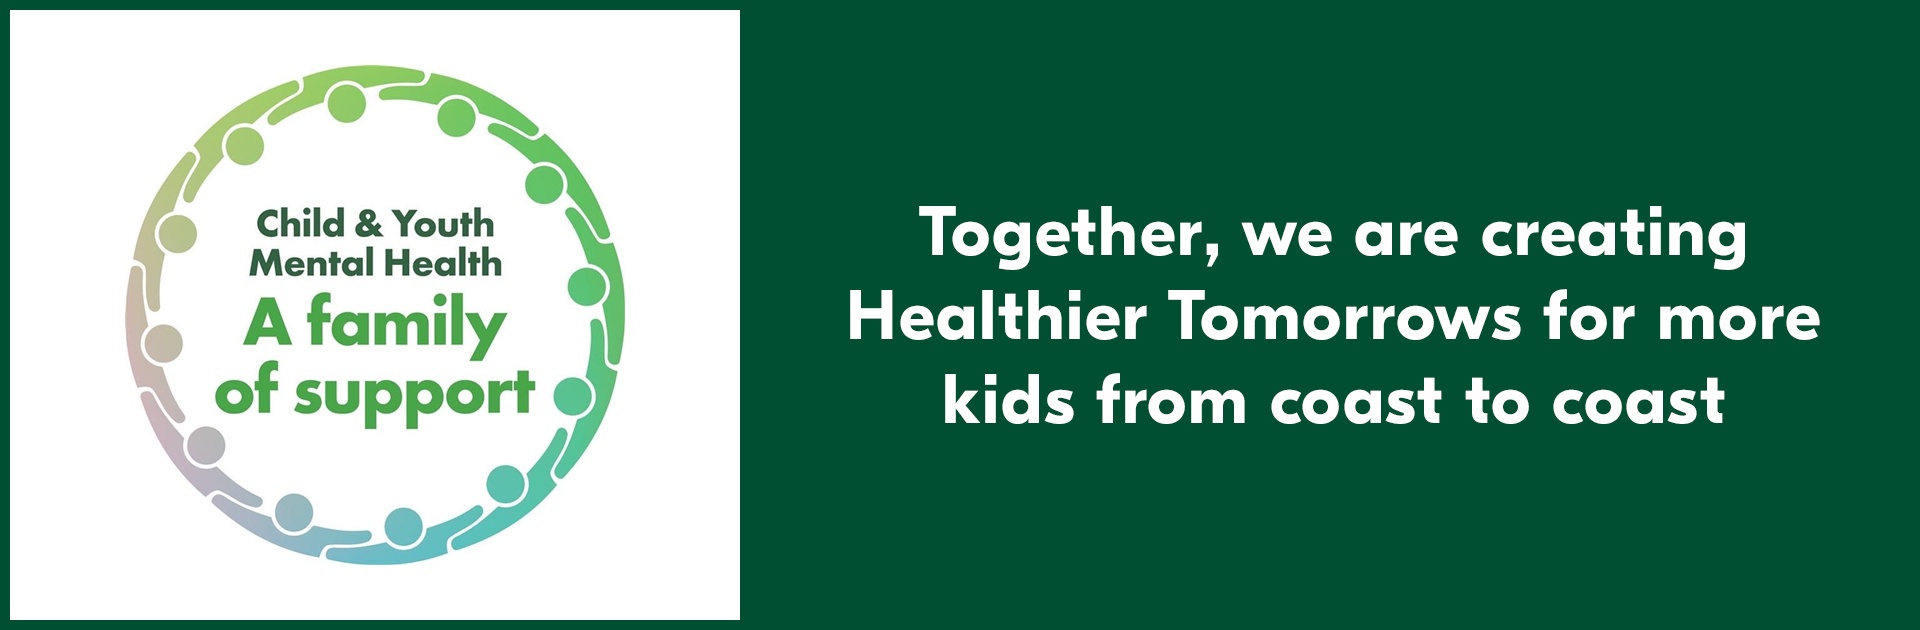 Text Reading 'Together, we are creating Healthier Tomorrows for more kids from coast to coast' from Child & Youth Mental Health A Family of Support.